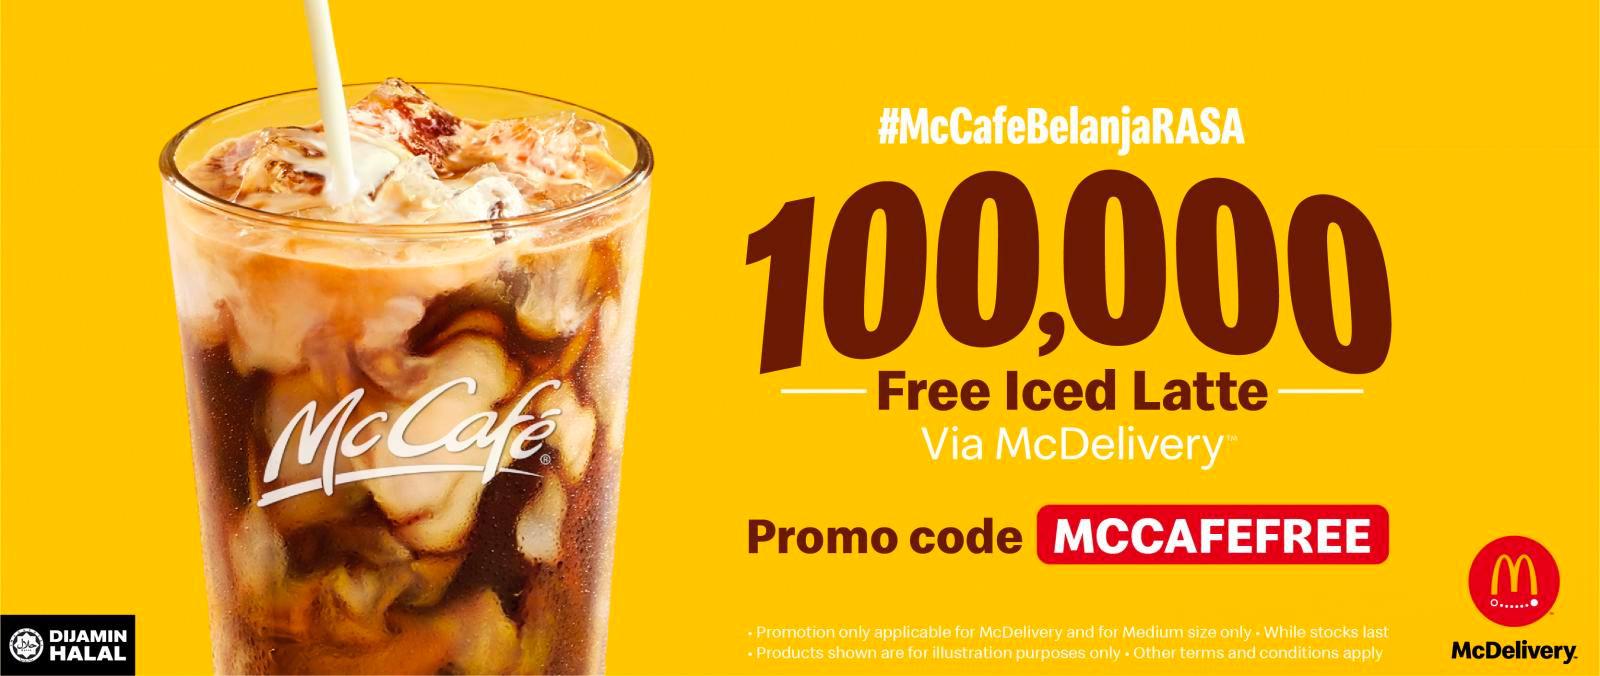 McDonald’s Malaysia celebrates International Coffee Day,  offers Malaysians 100,000 free McCafé Iced Lattes in October's image'